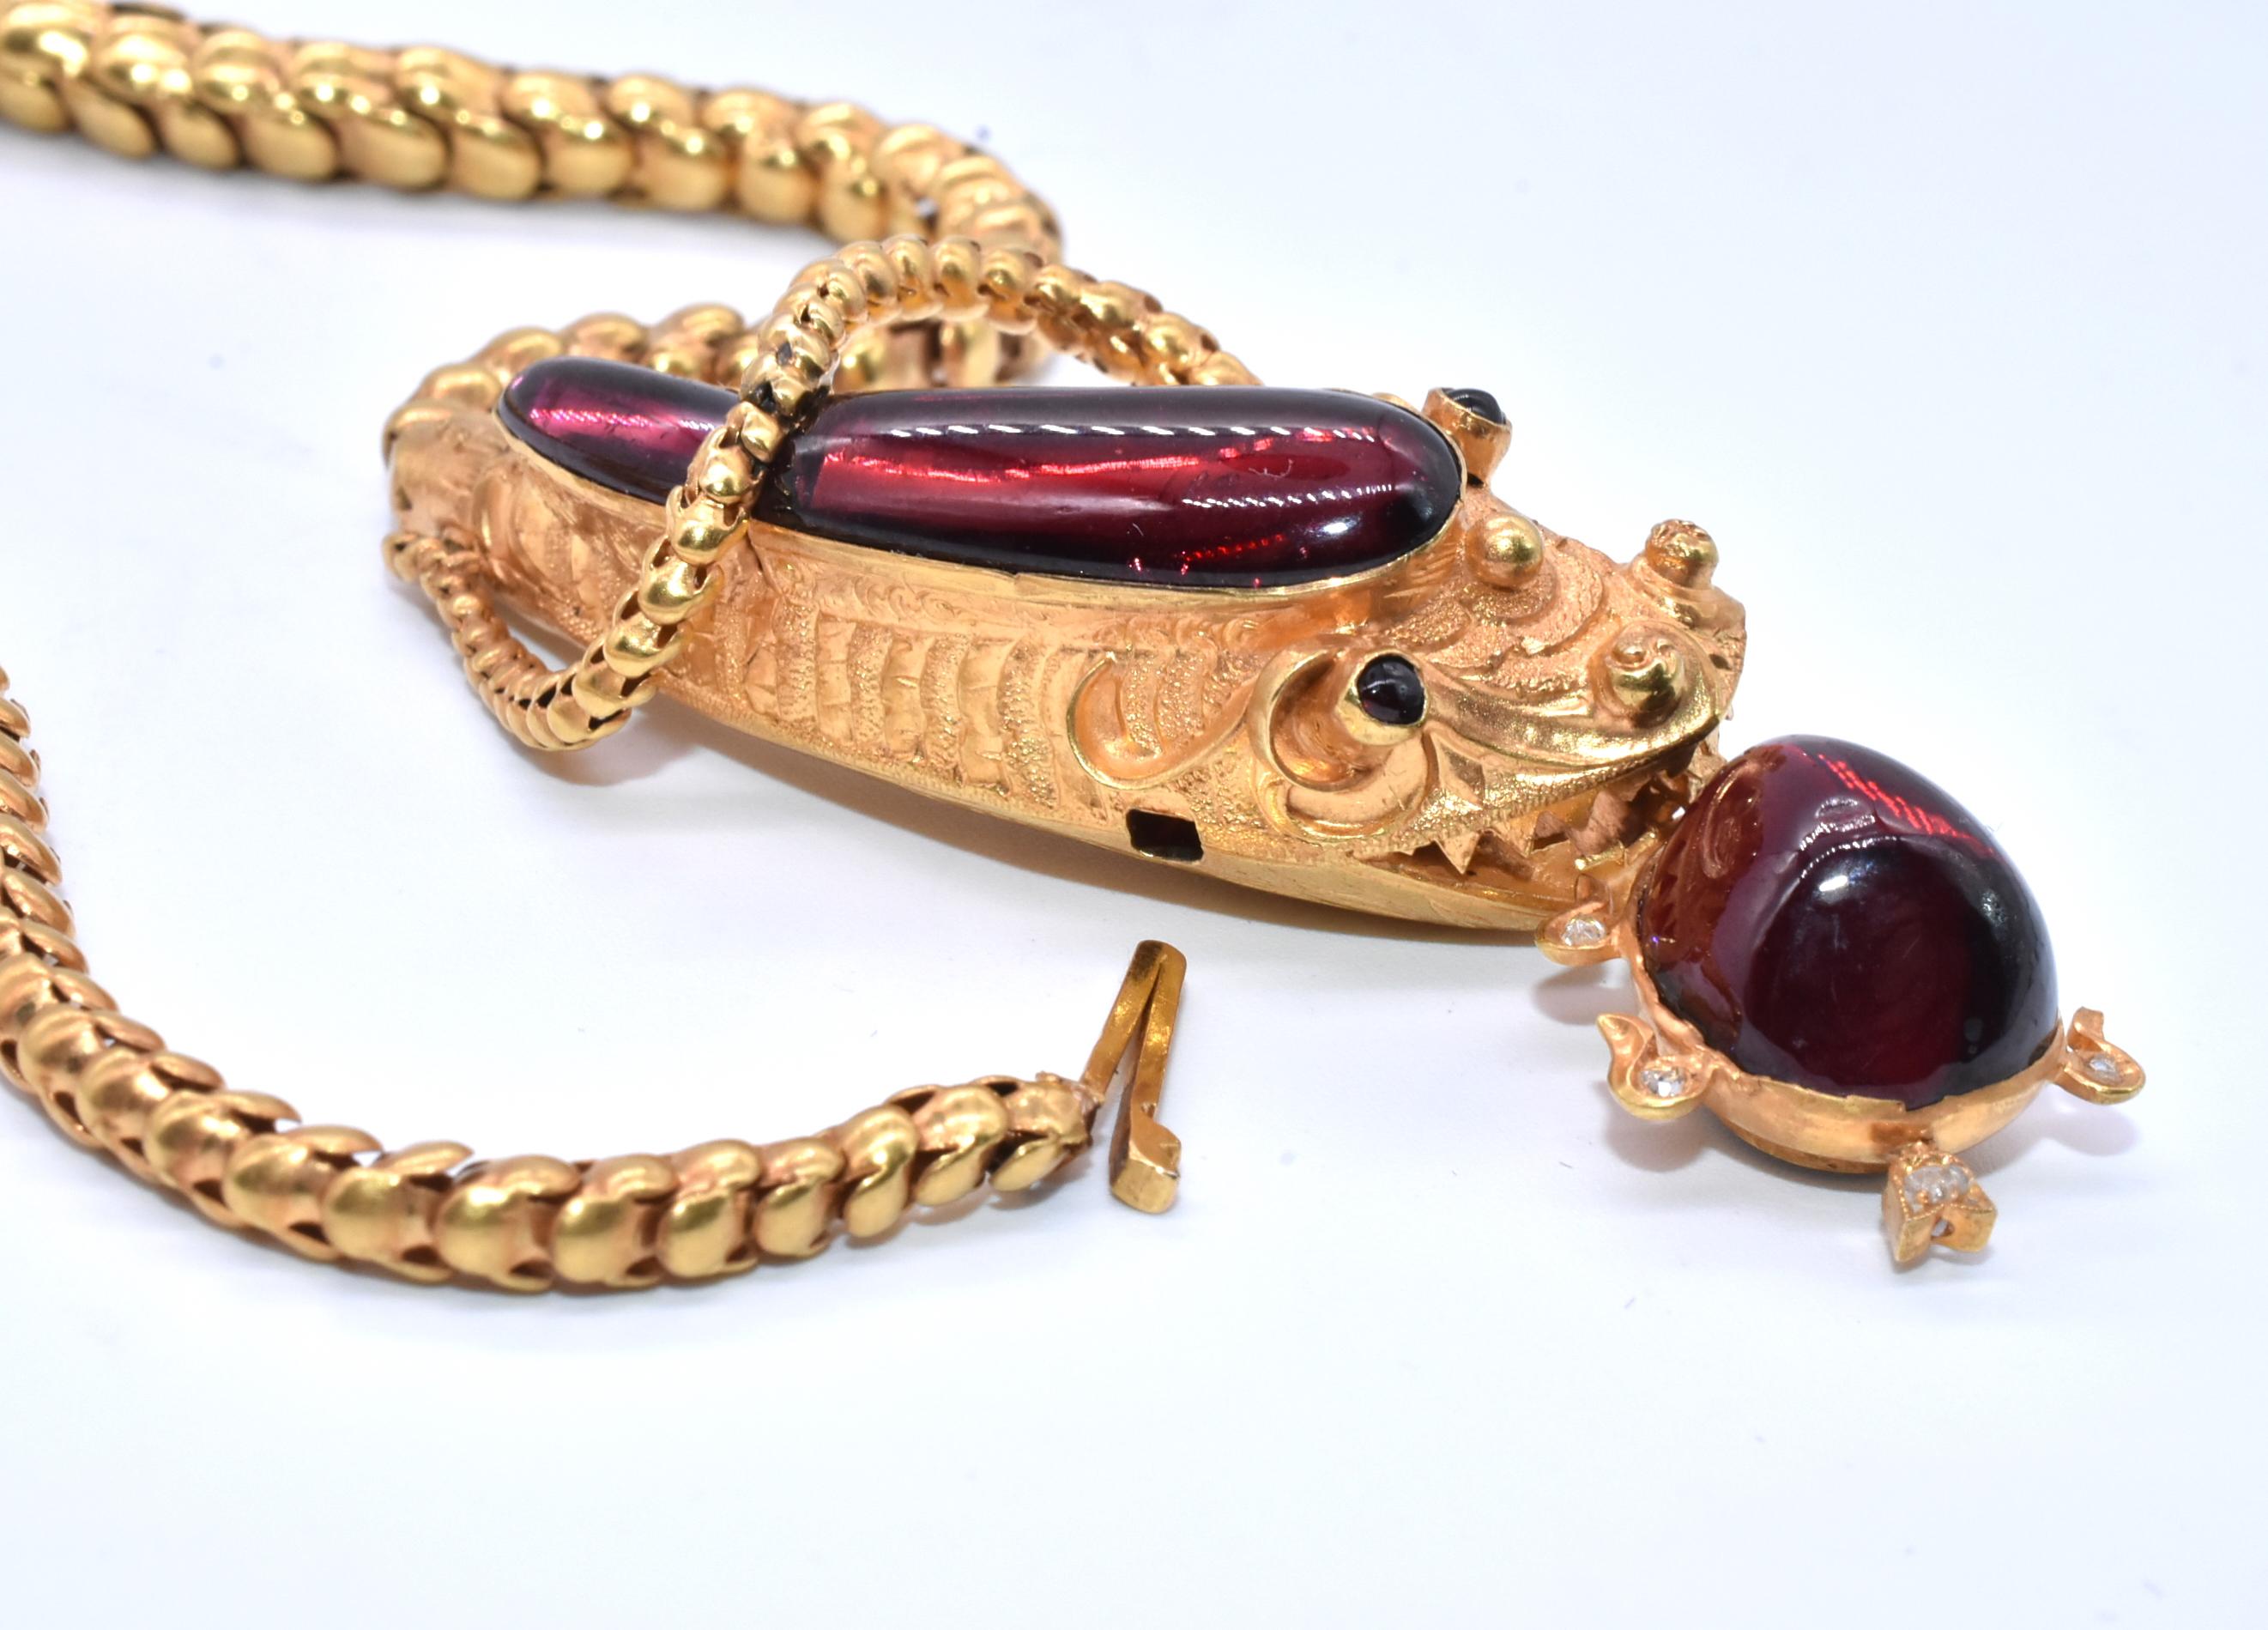 Antique Serpent Biting Turtle Choker with Garnets and Diamonds 5